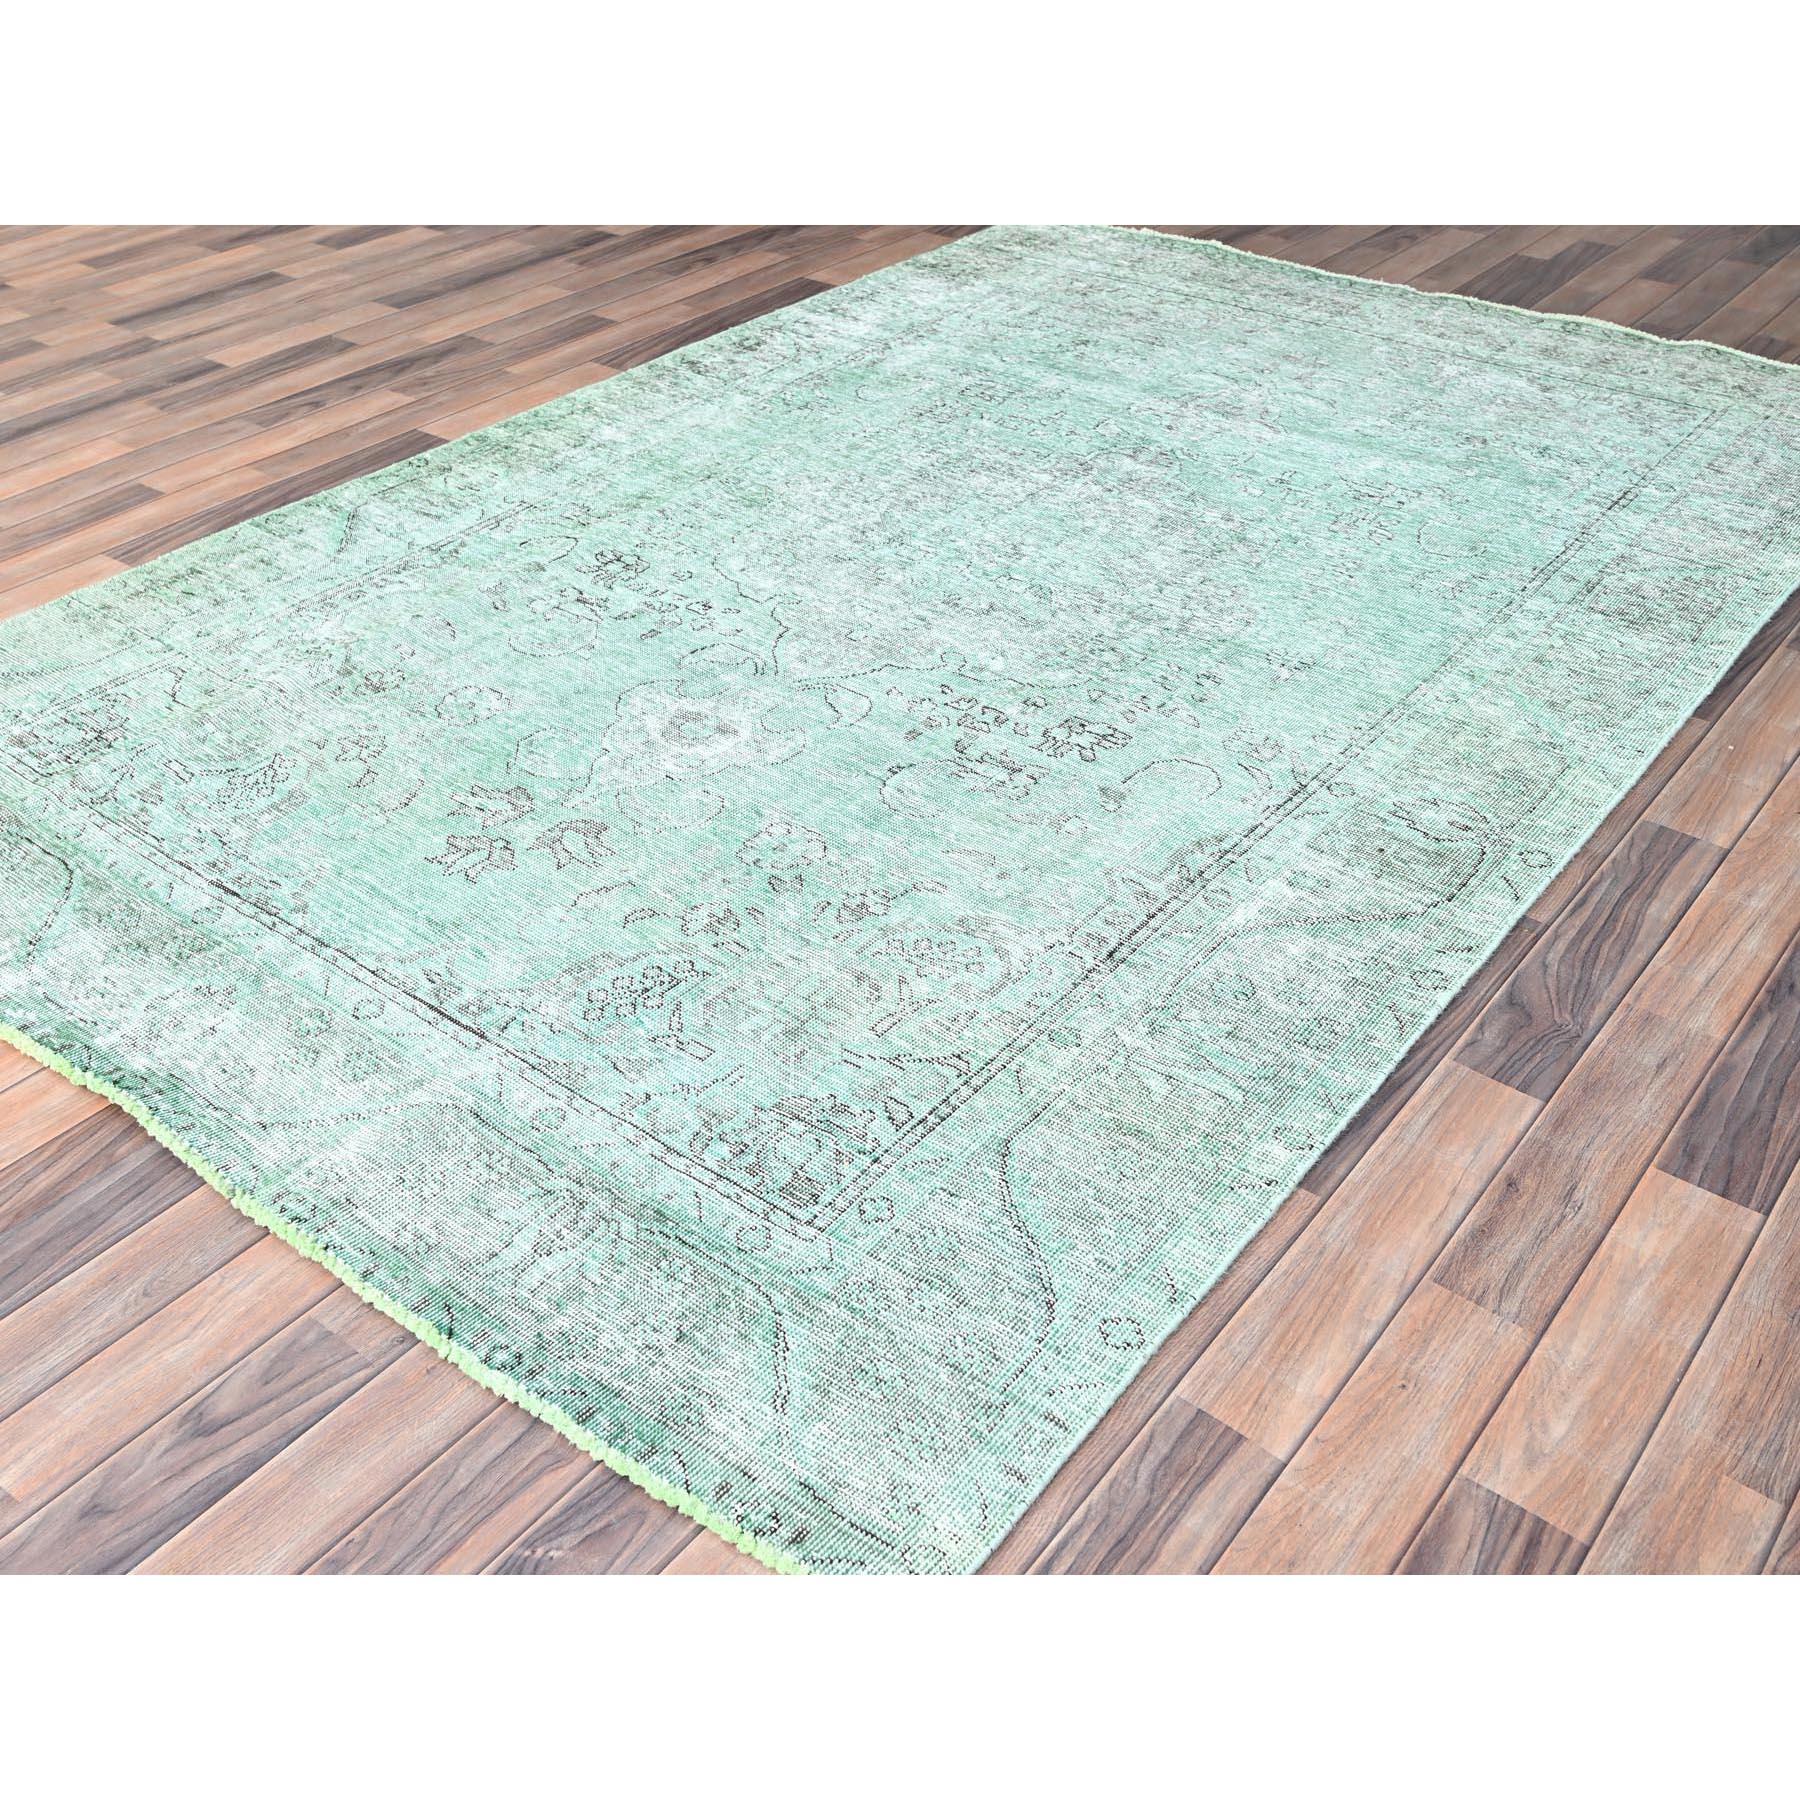 Green Overdyed Worn Wool Hand Knotted Vintage Persian Tabriz Rustic Feel Rug In Fair Condition For Sale In Carlstadt, NJ